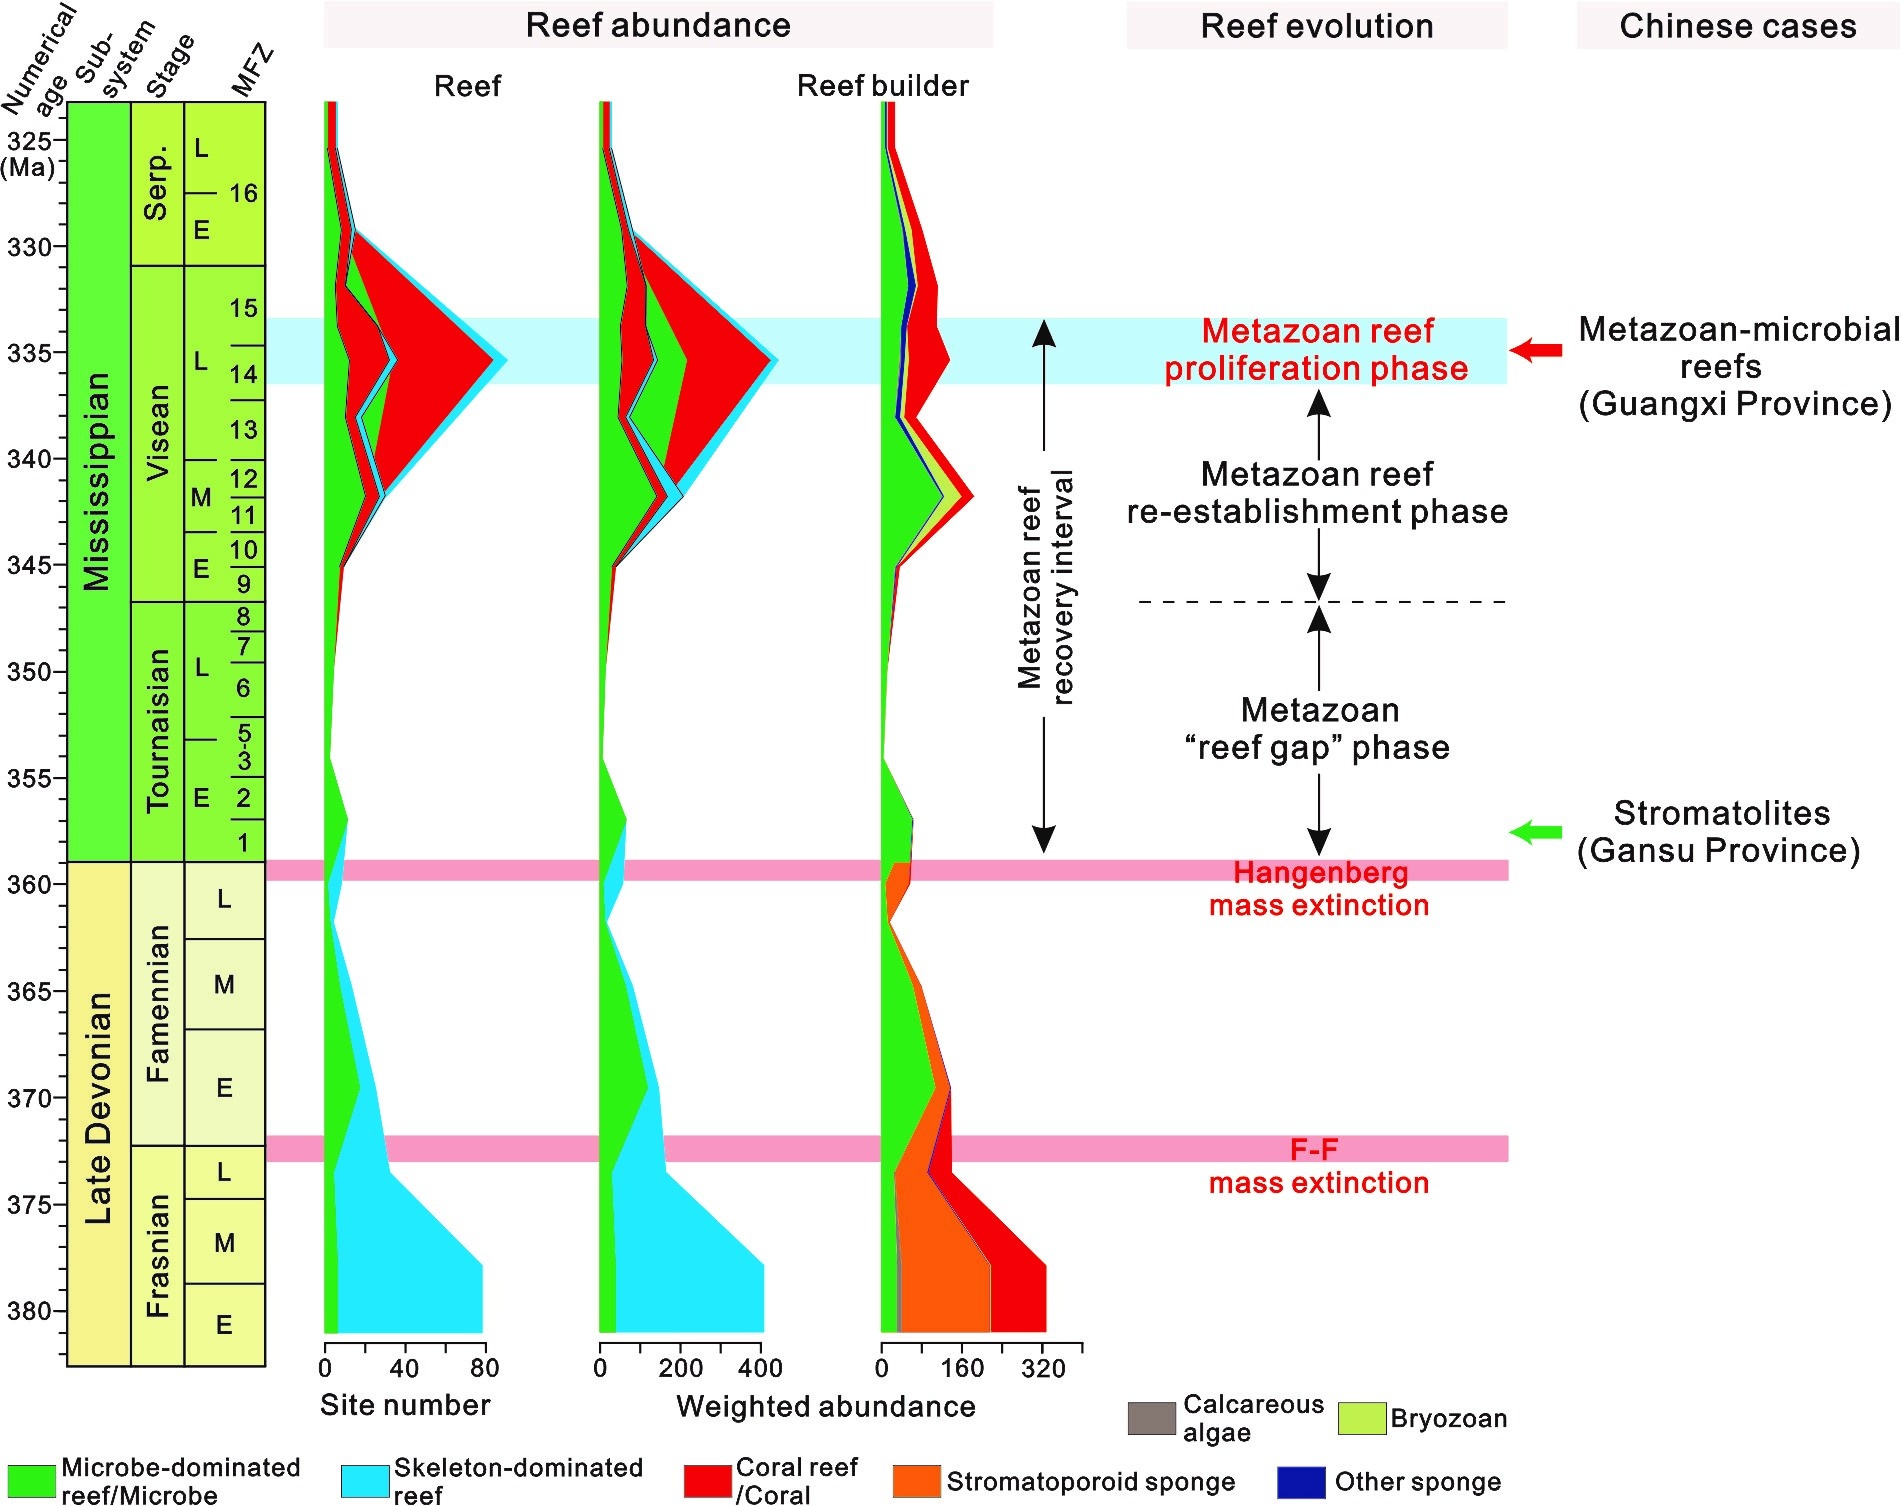 Chinese samples witnessed reef evolutionary process after the Late Devonian mass extinctions